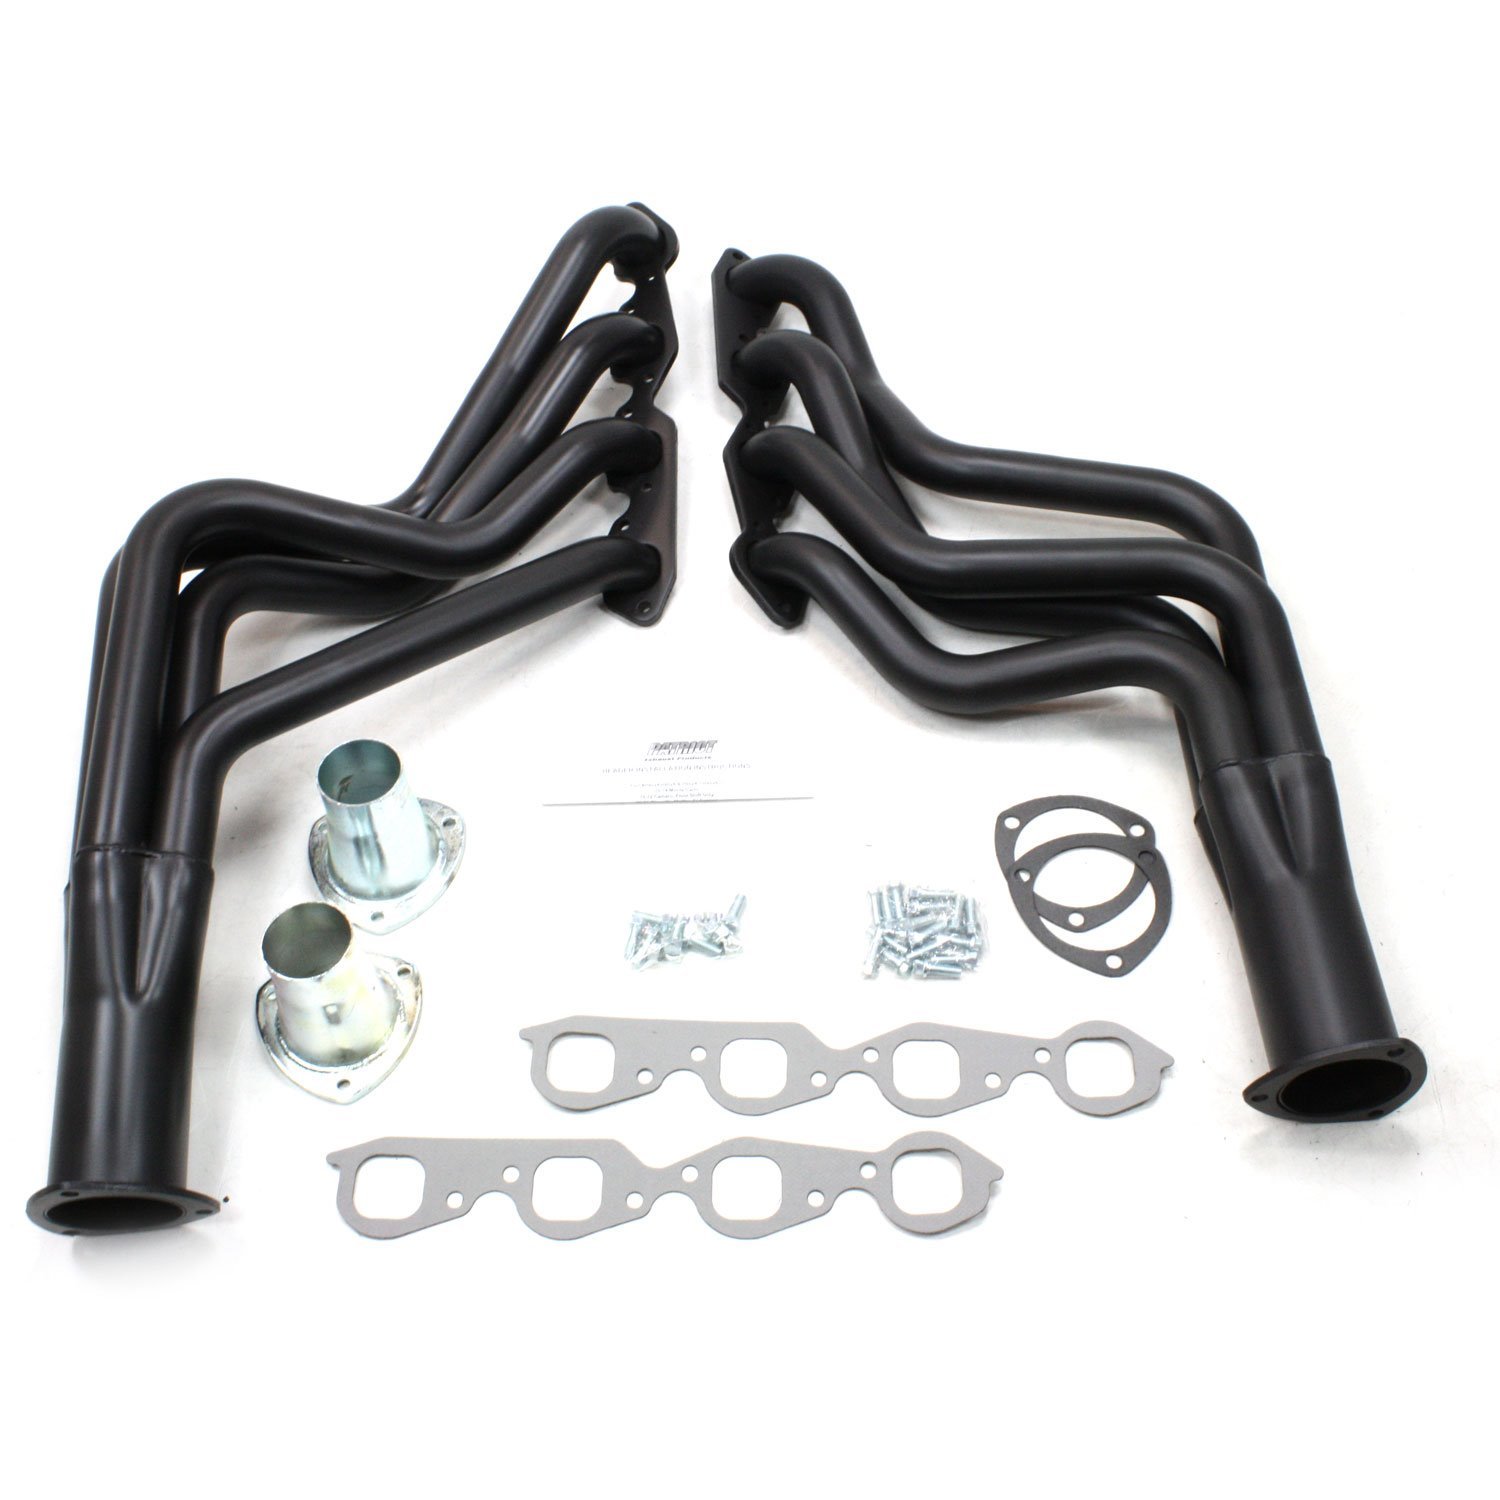 GM Specific Fit Headers 1971-1974 Full Size Passenger Car